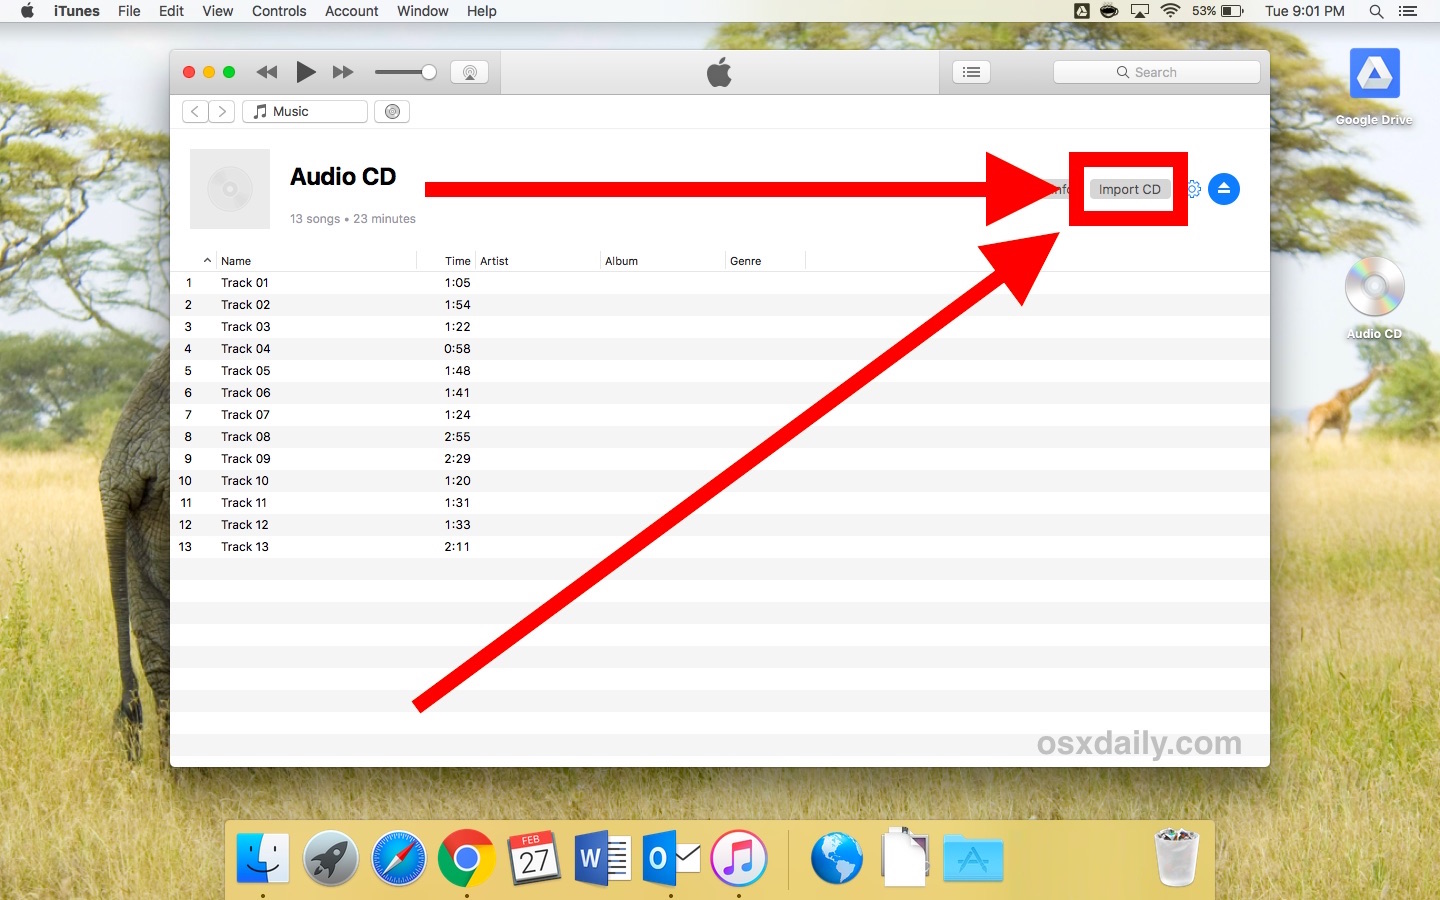 How to import and rip a CD to mp3 in iTunes